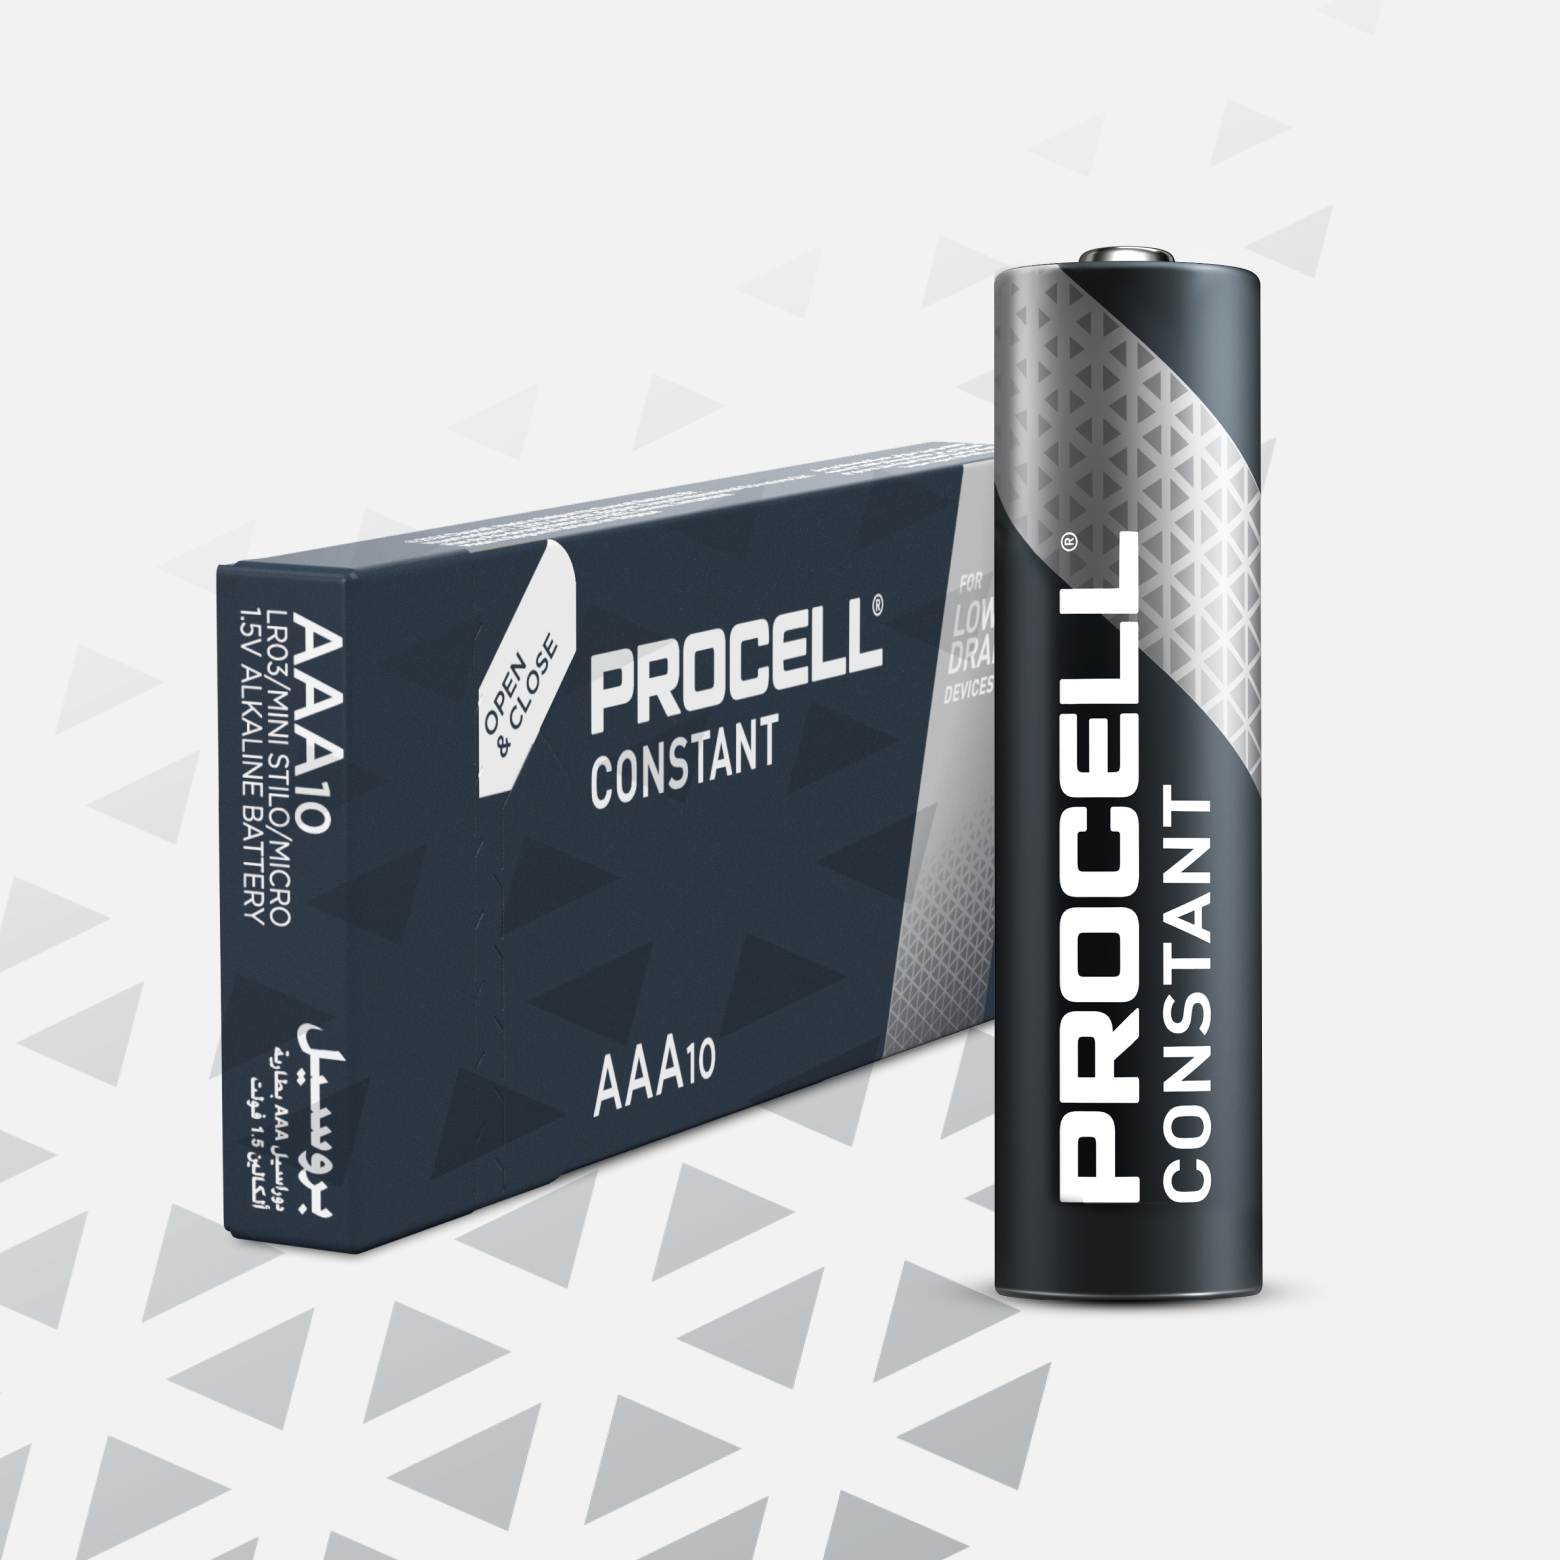 Procell Constant AAA